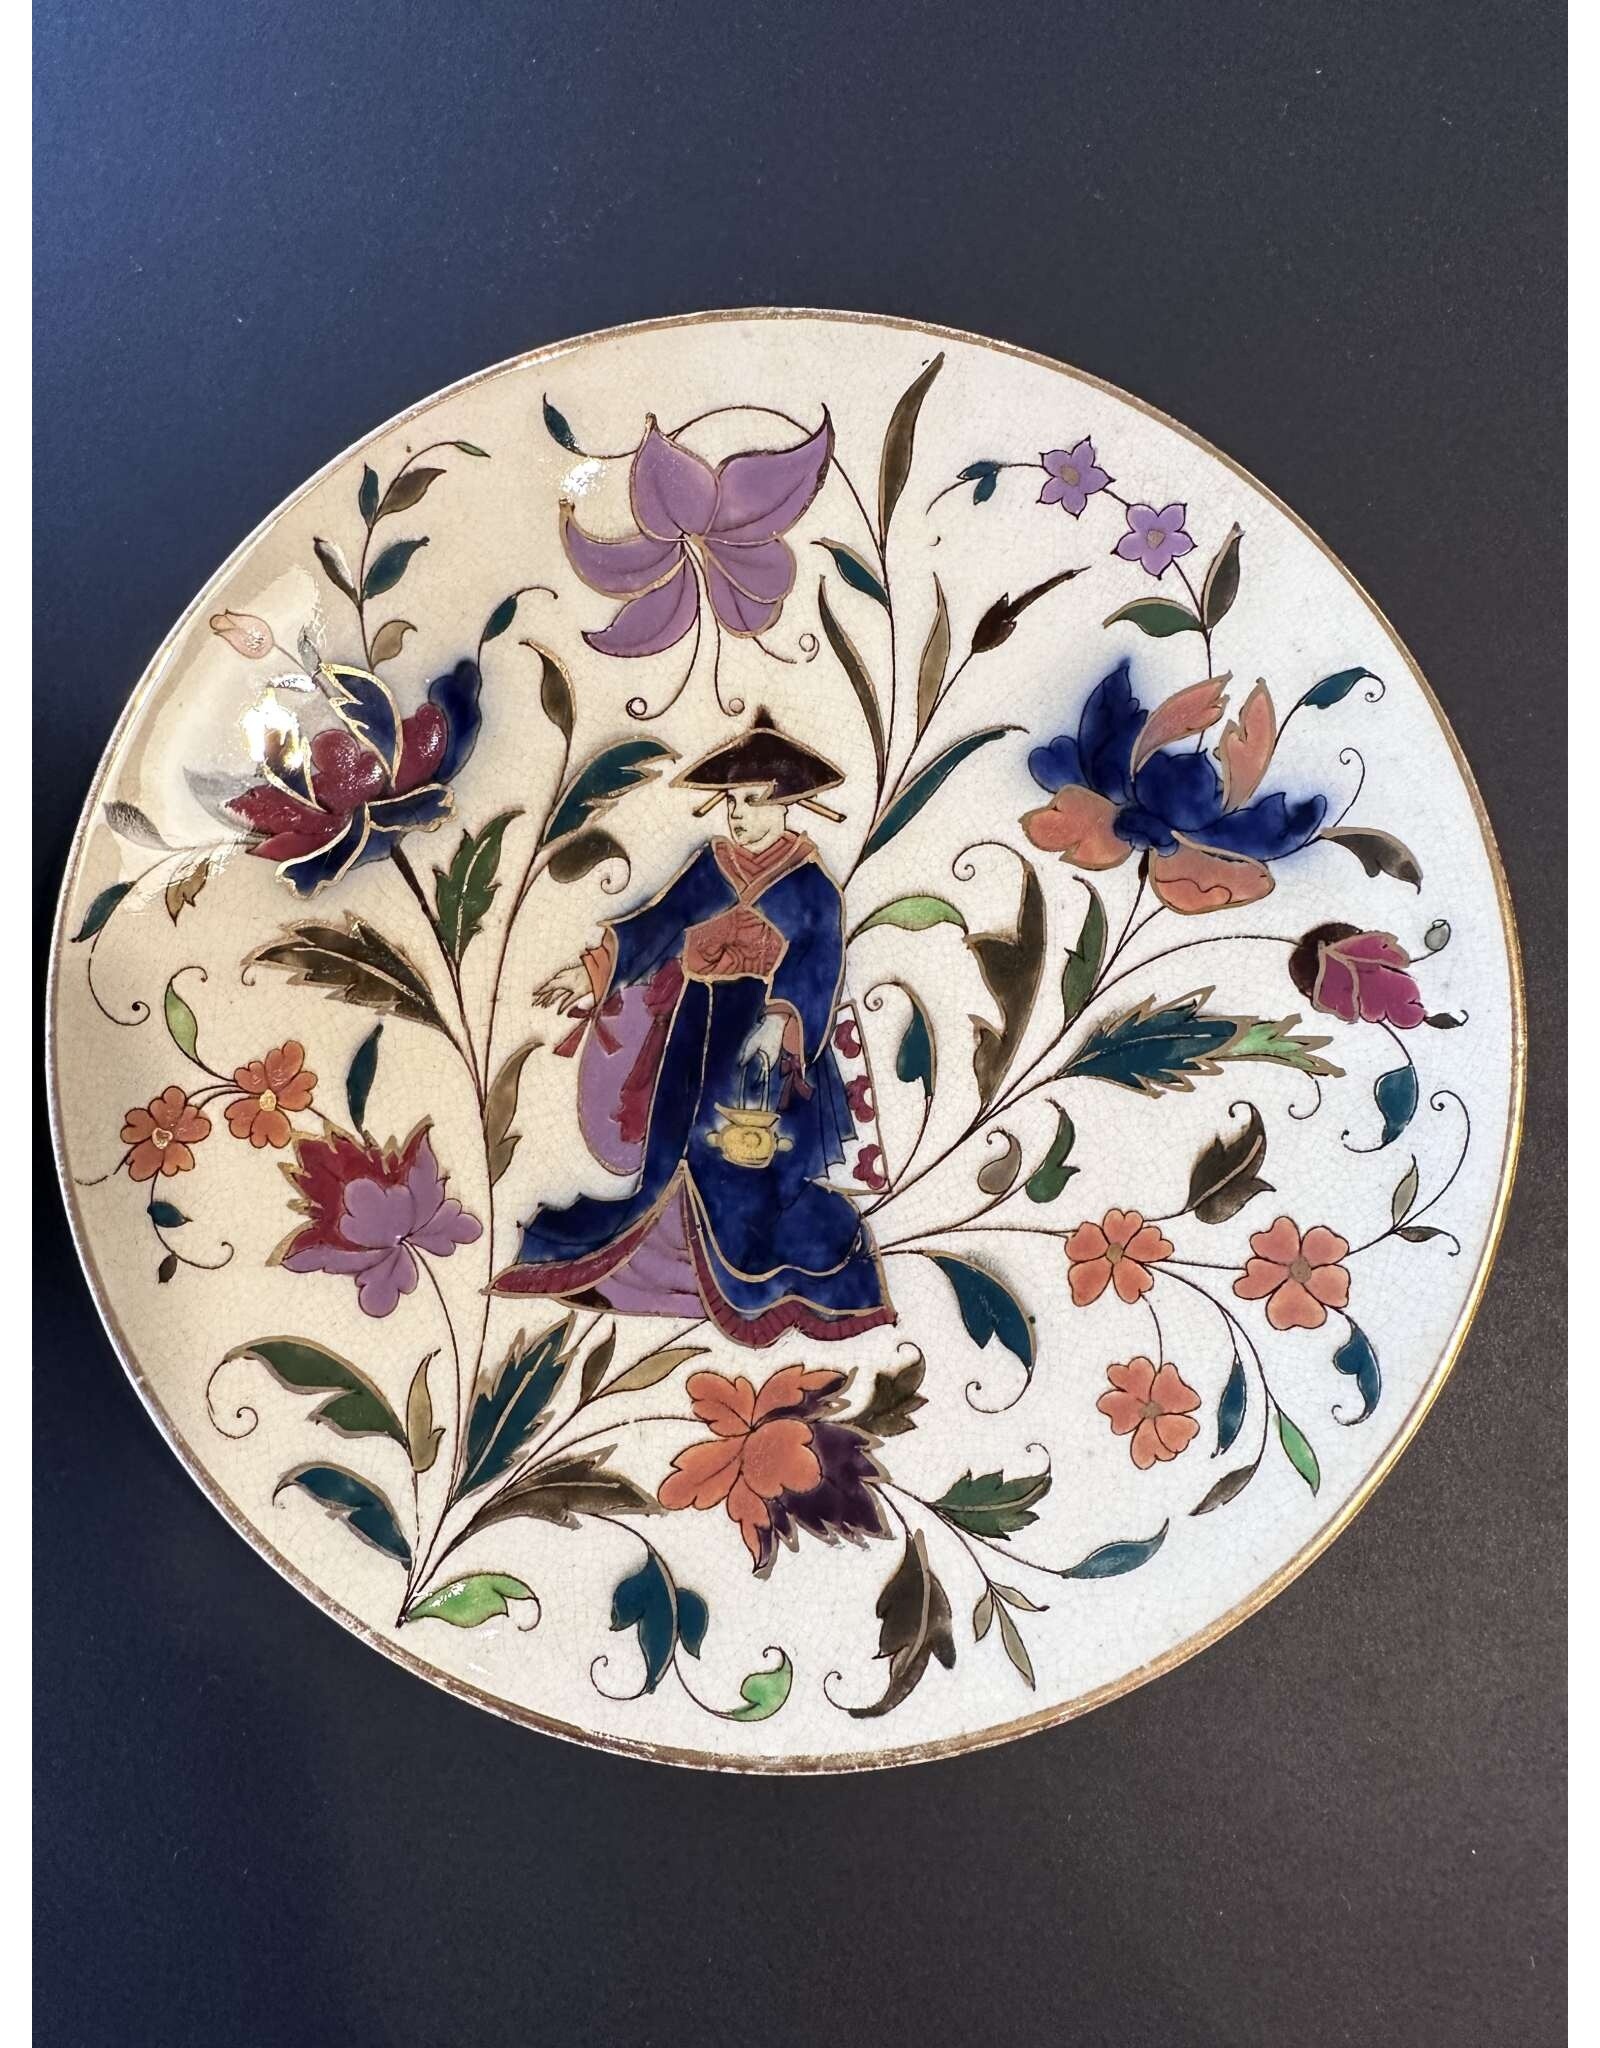 1900's RARE PAIR OF HAND PAINTED PLATES